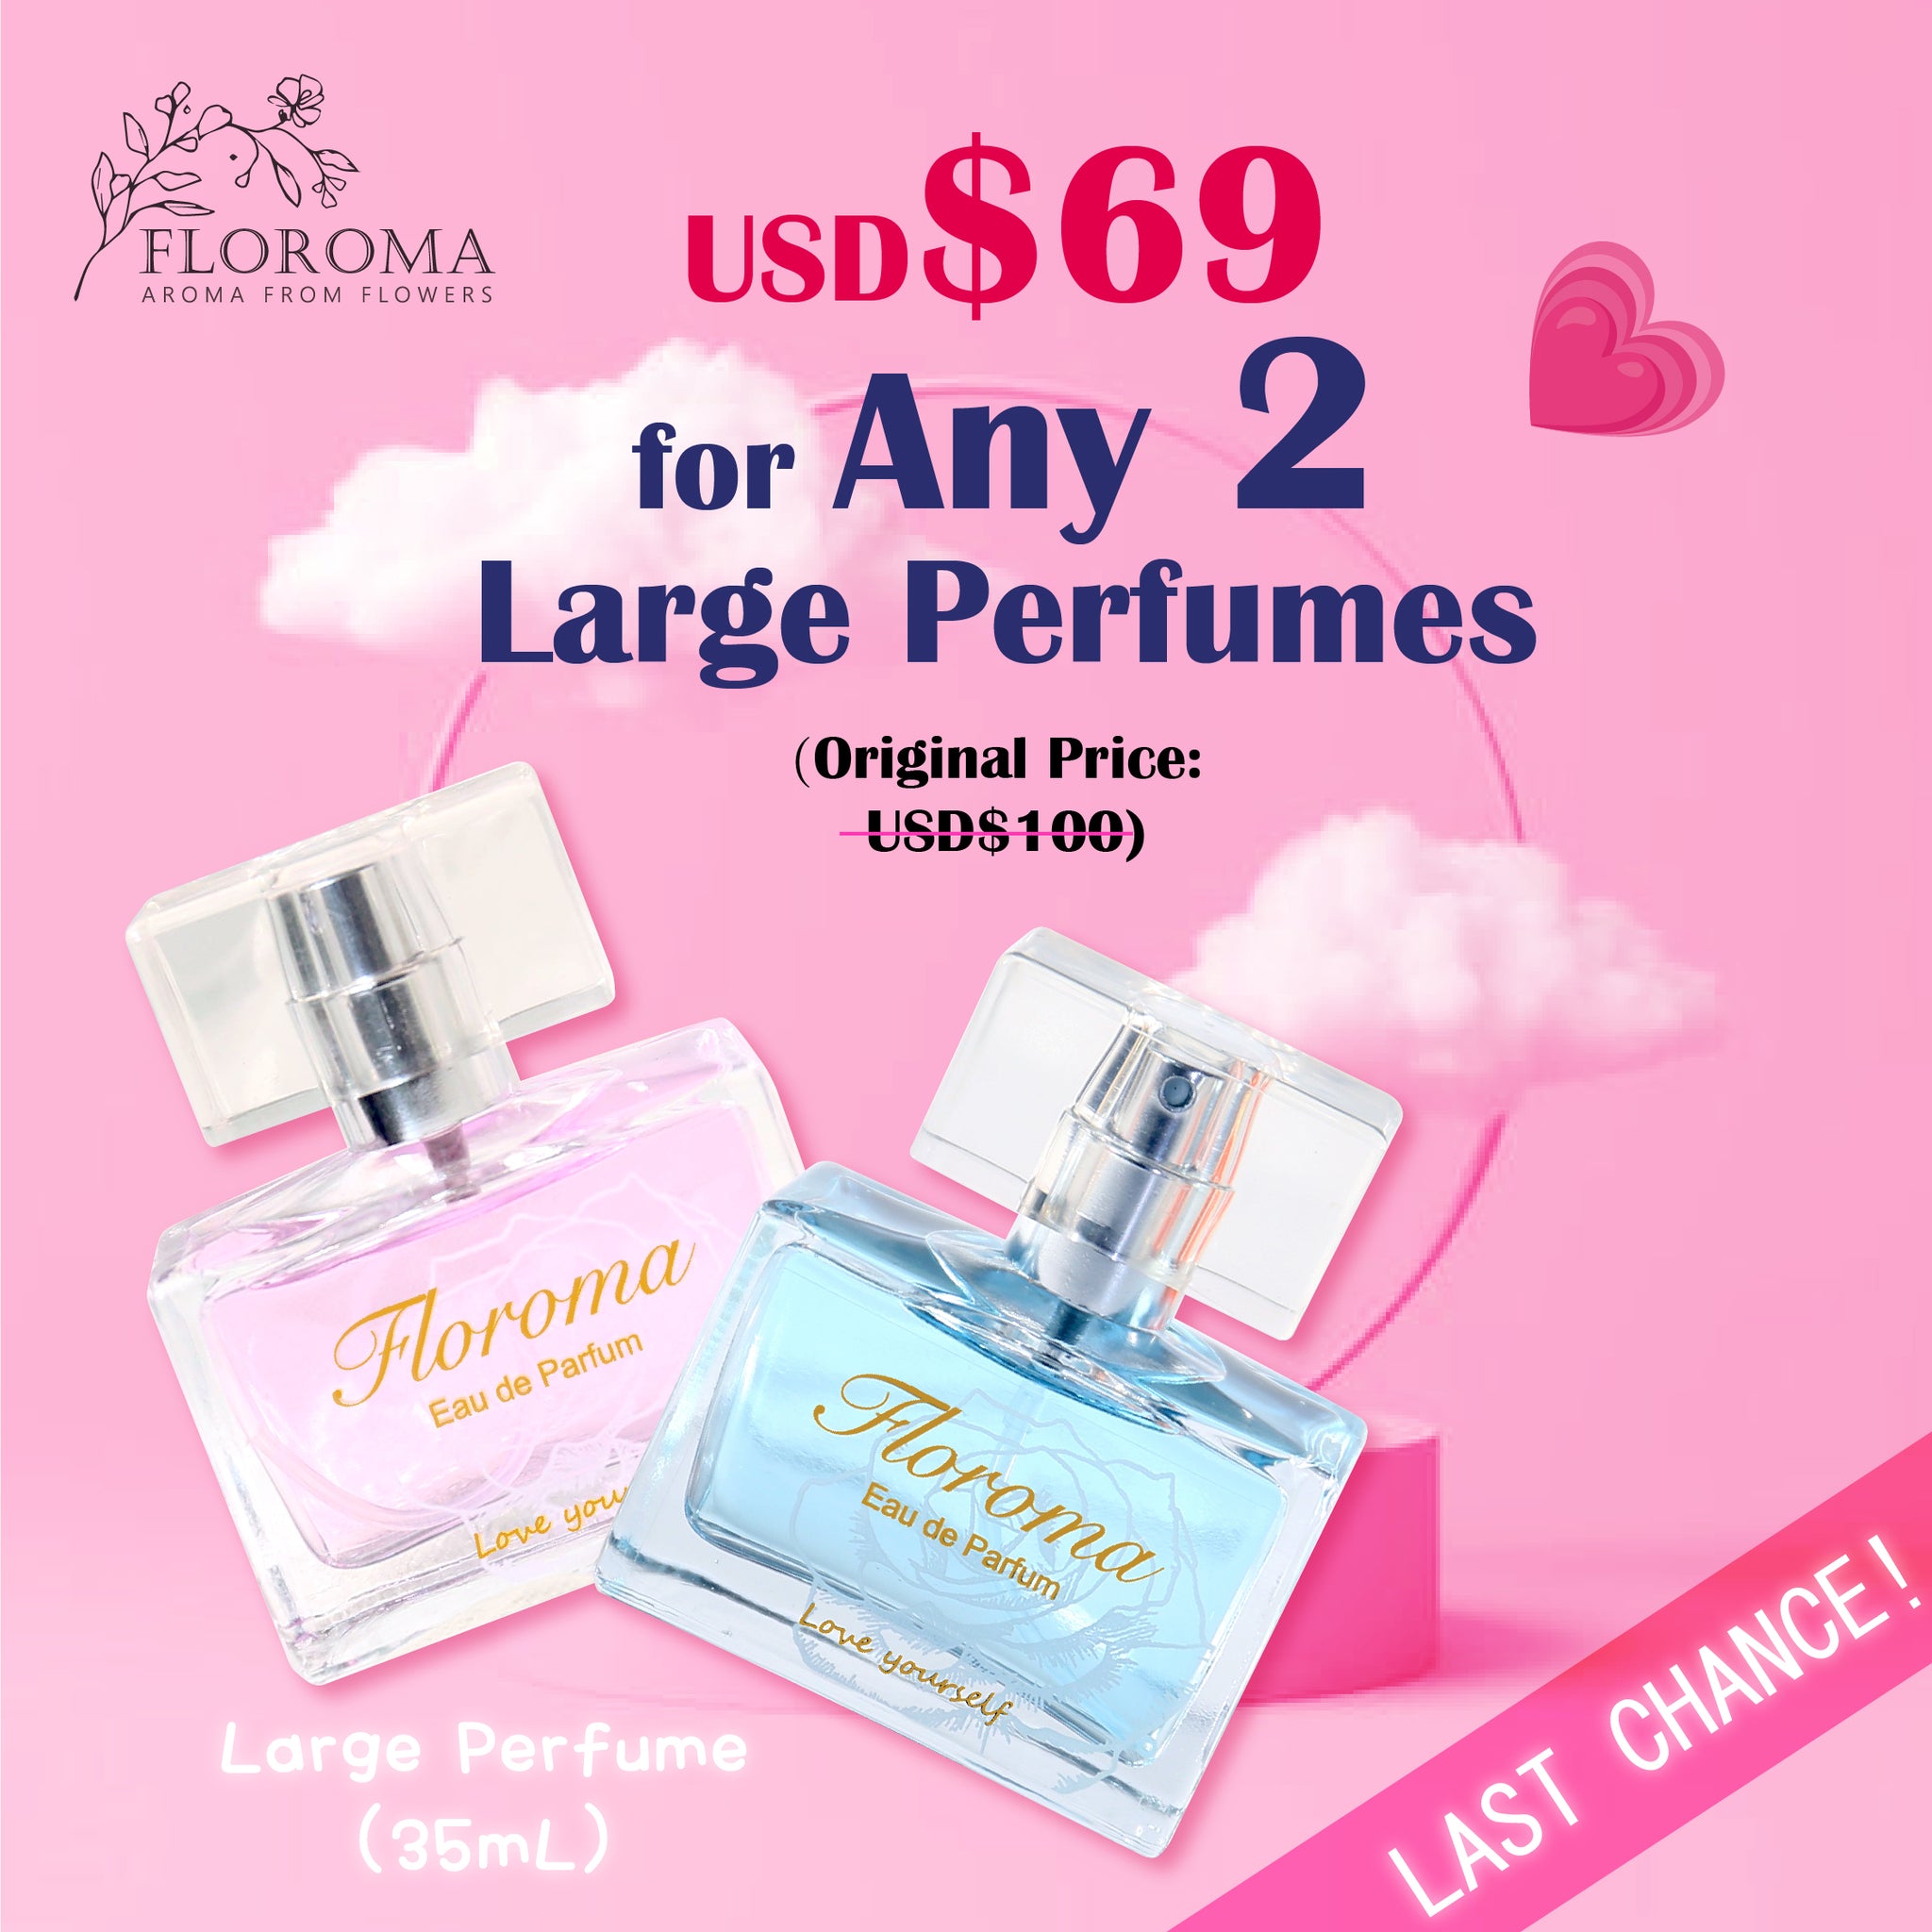 Choose Your Own Perfume Combination】 $69 For Any 2 Big Perfume (35ml) –  Floroma 花の滴